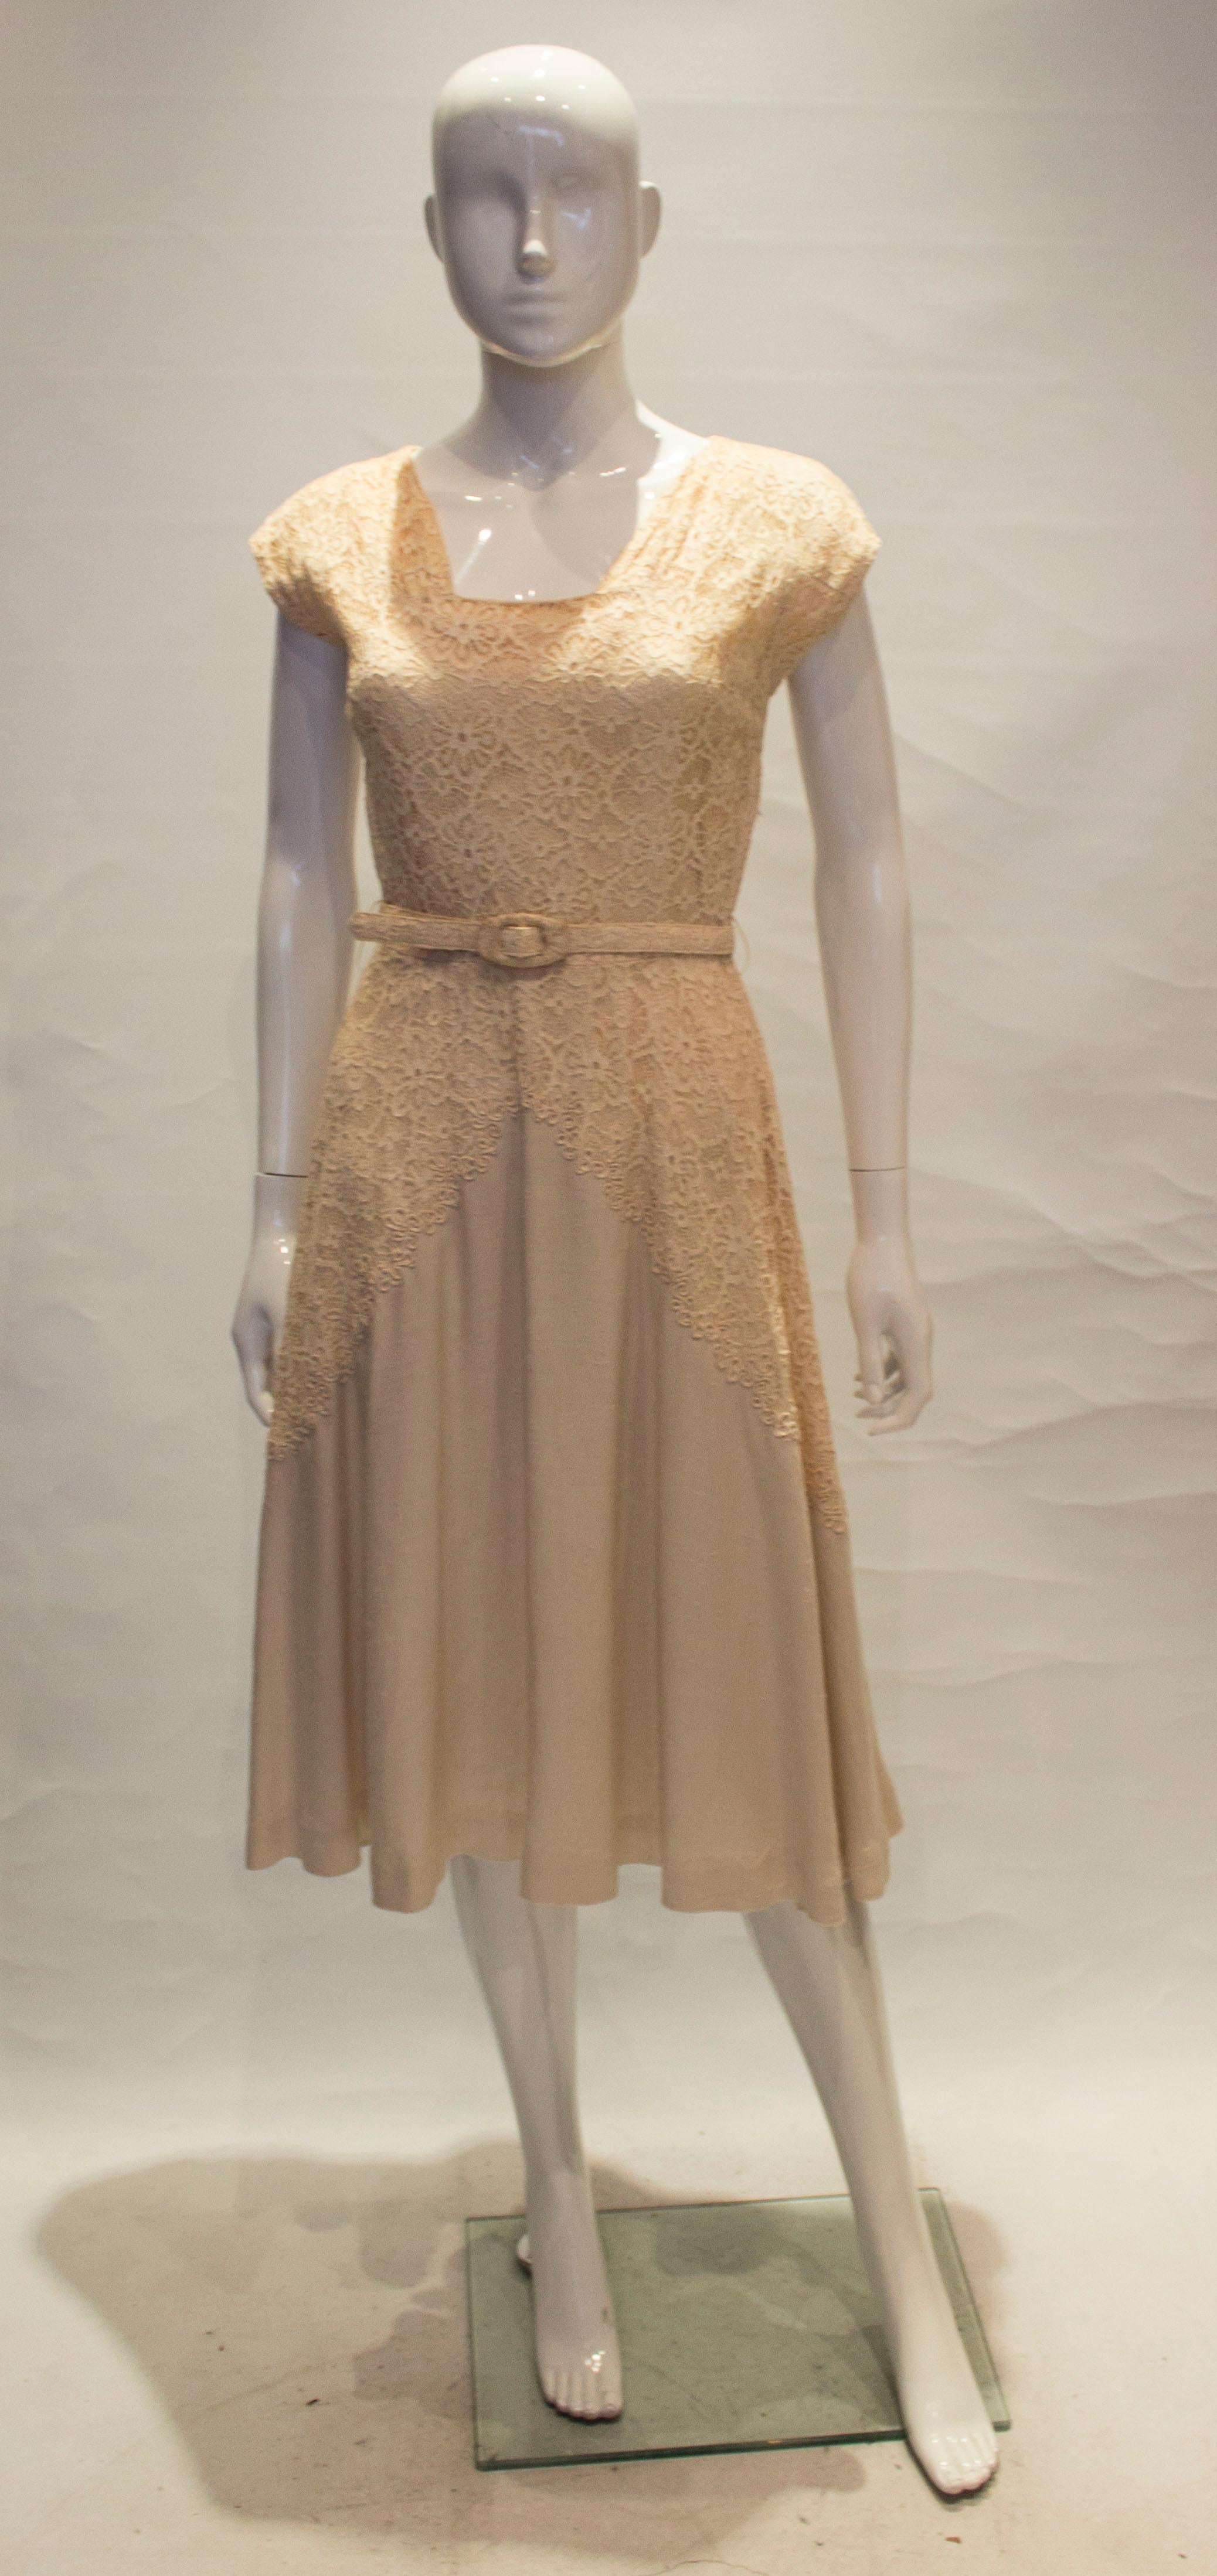 A pretty vintage dress by Well Made , London. The dress has a square neckline, and lace detail on the front and back. it has a self fabric belt , full skirt and is partly lined.

